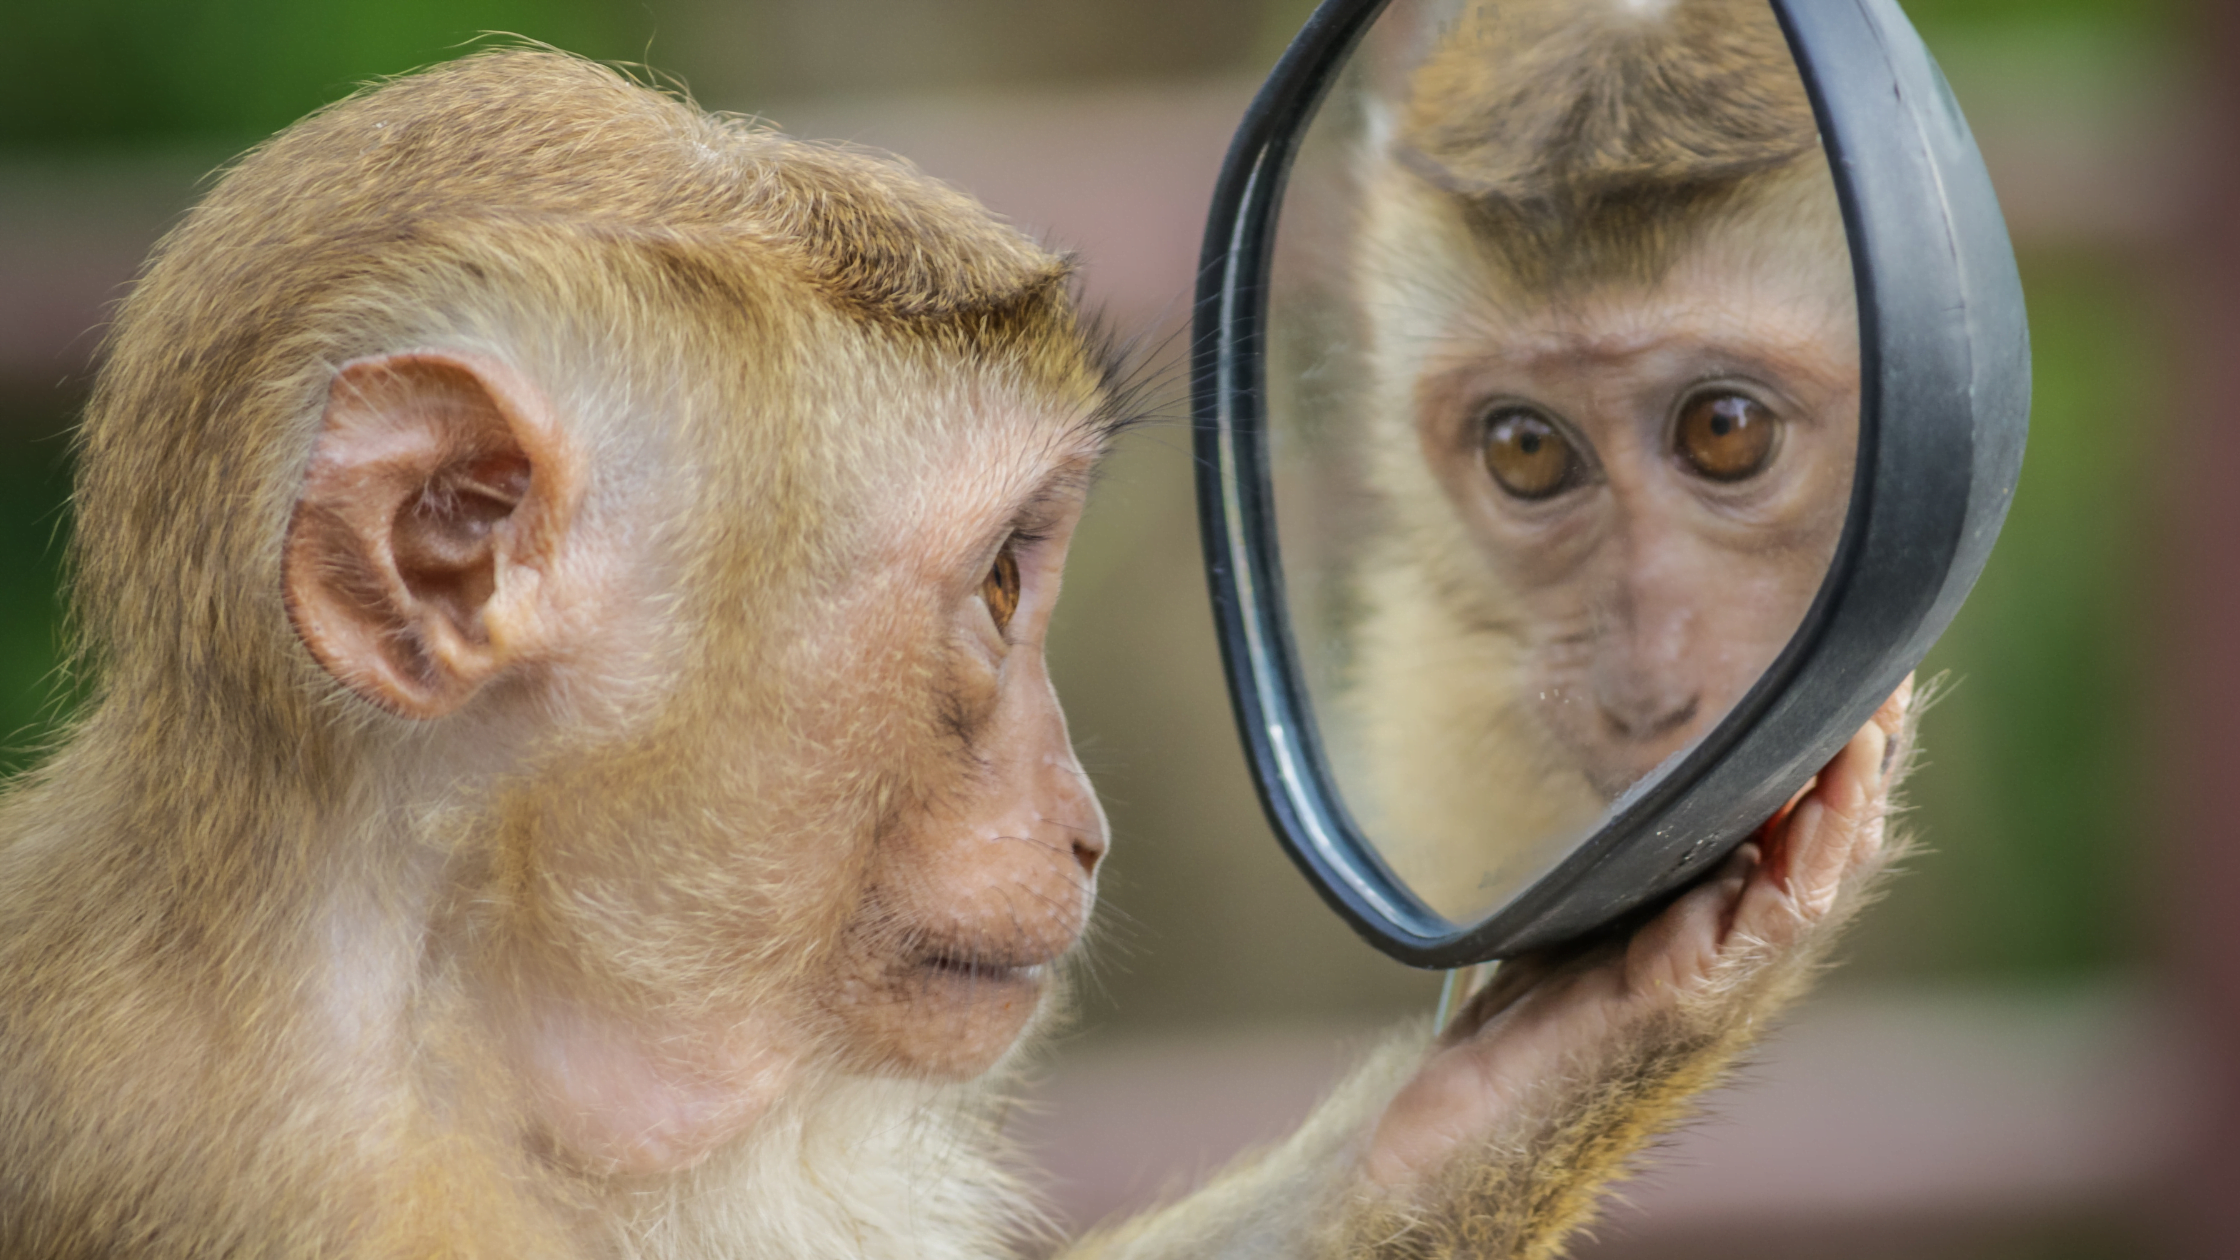 gibbon looking into mirror, seeing self reflection